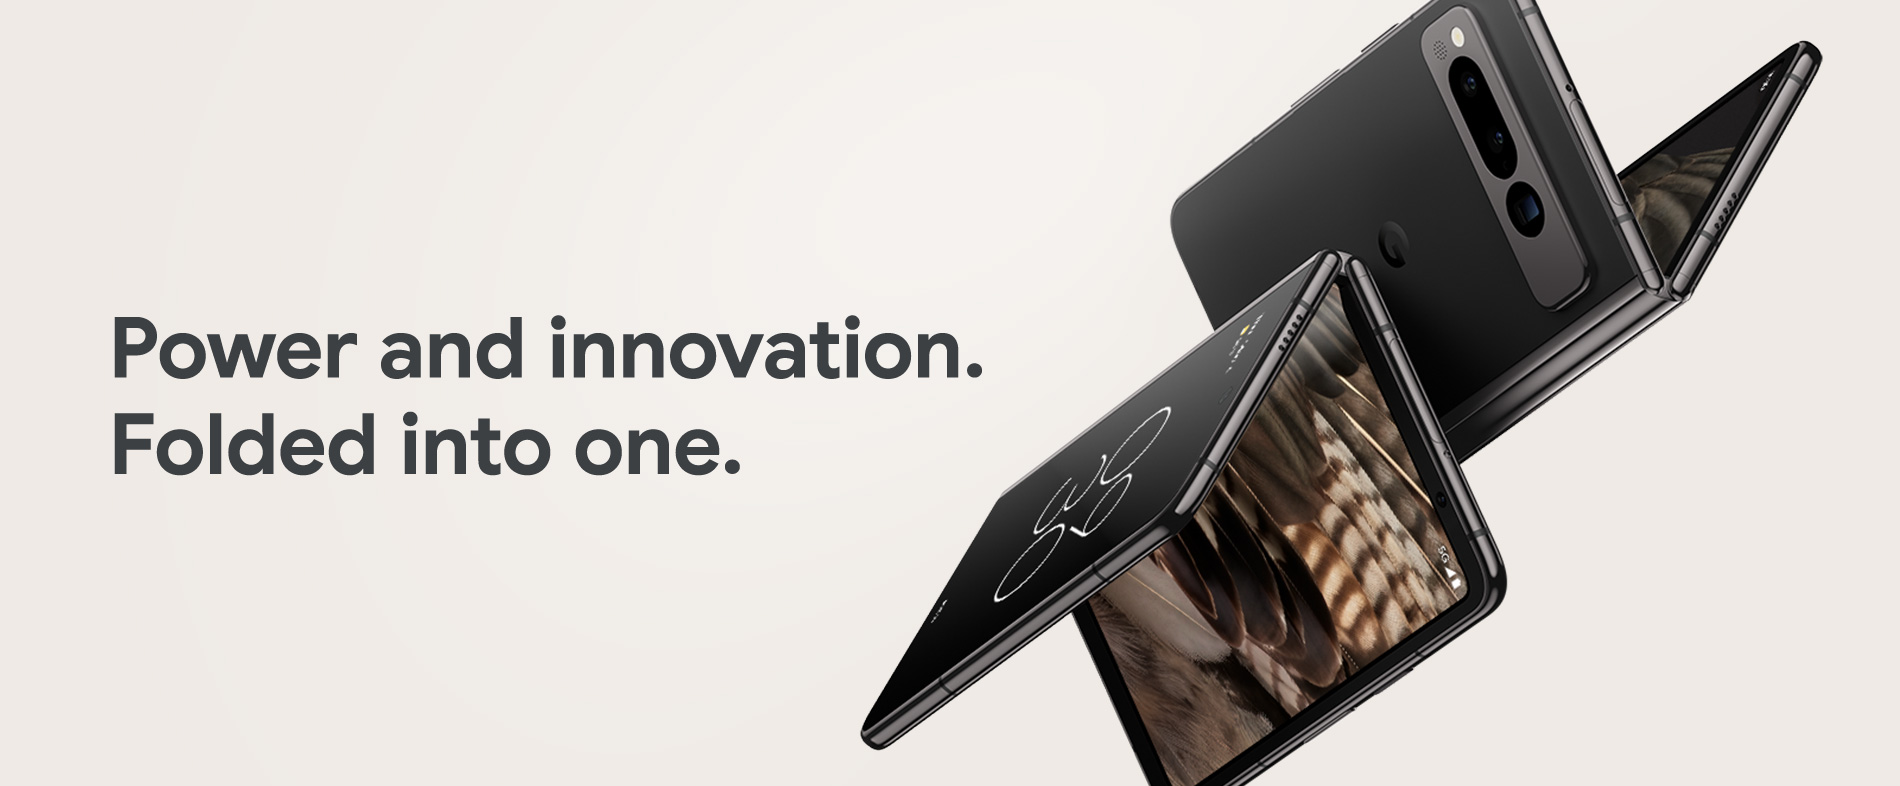 Power and innovation. Folded into one.